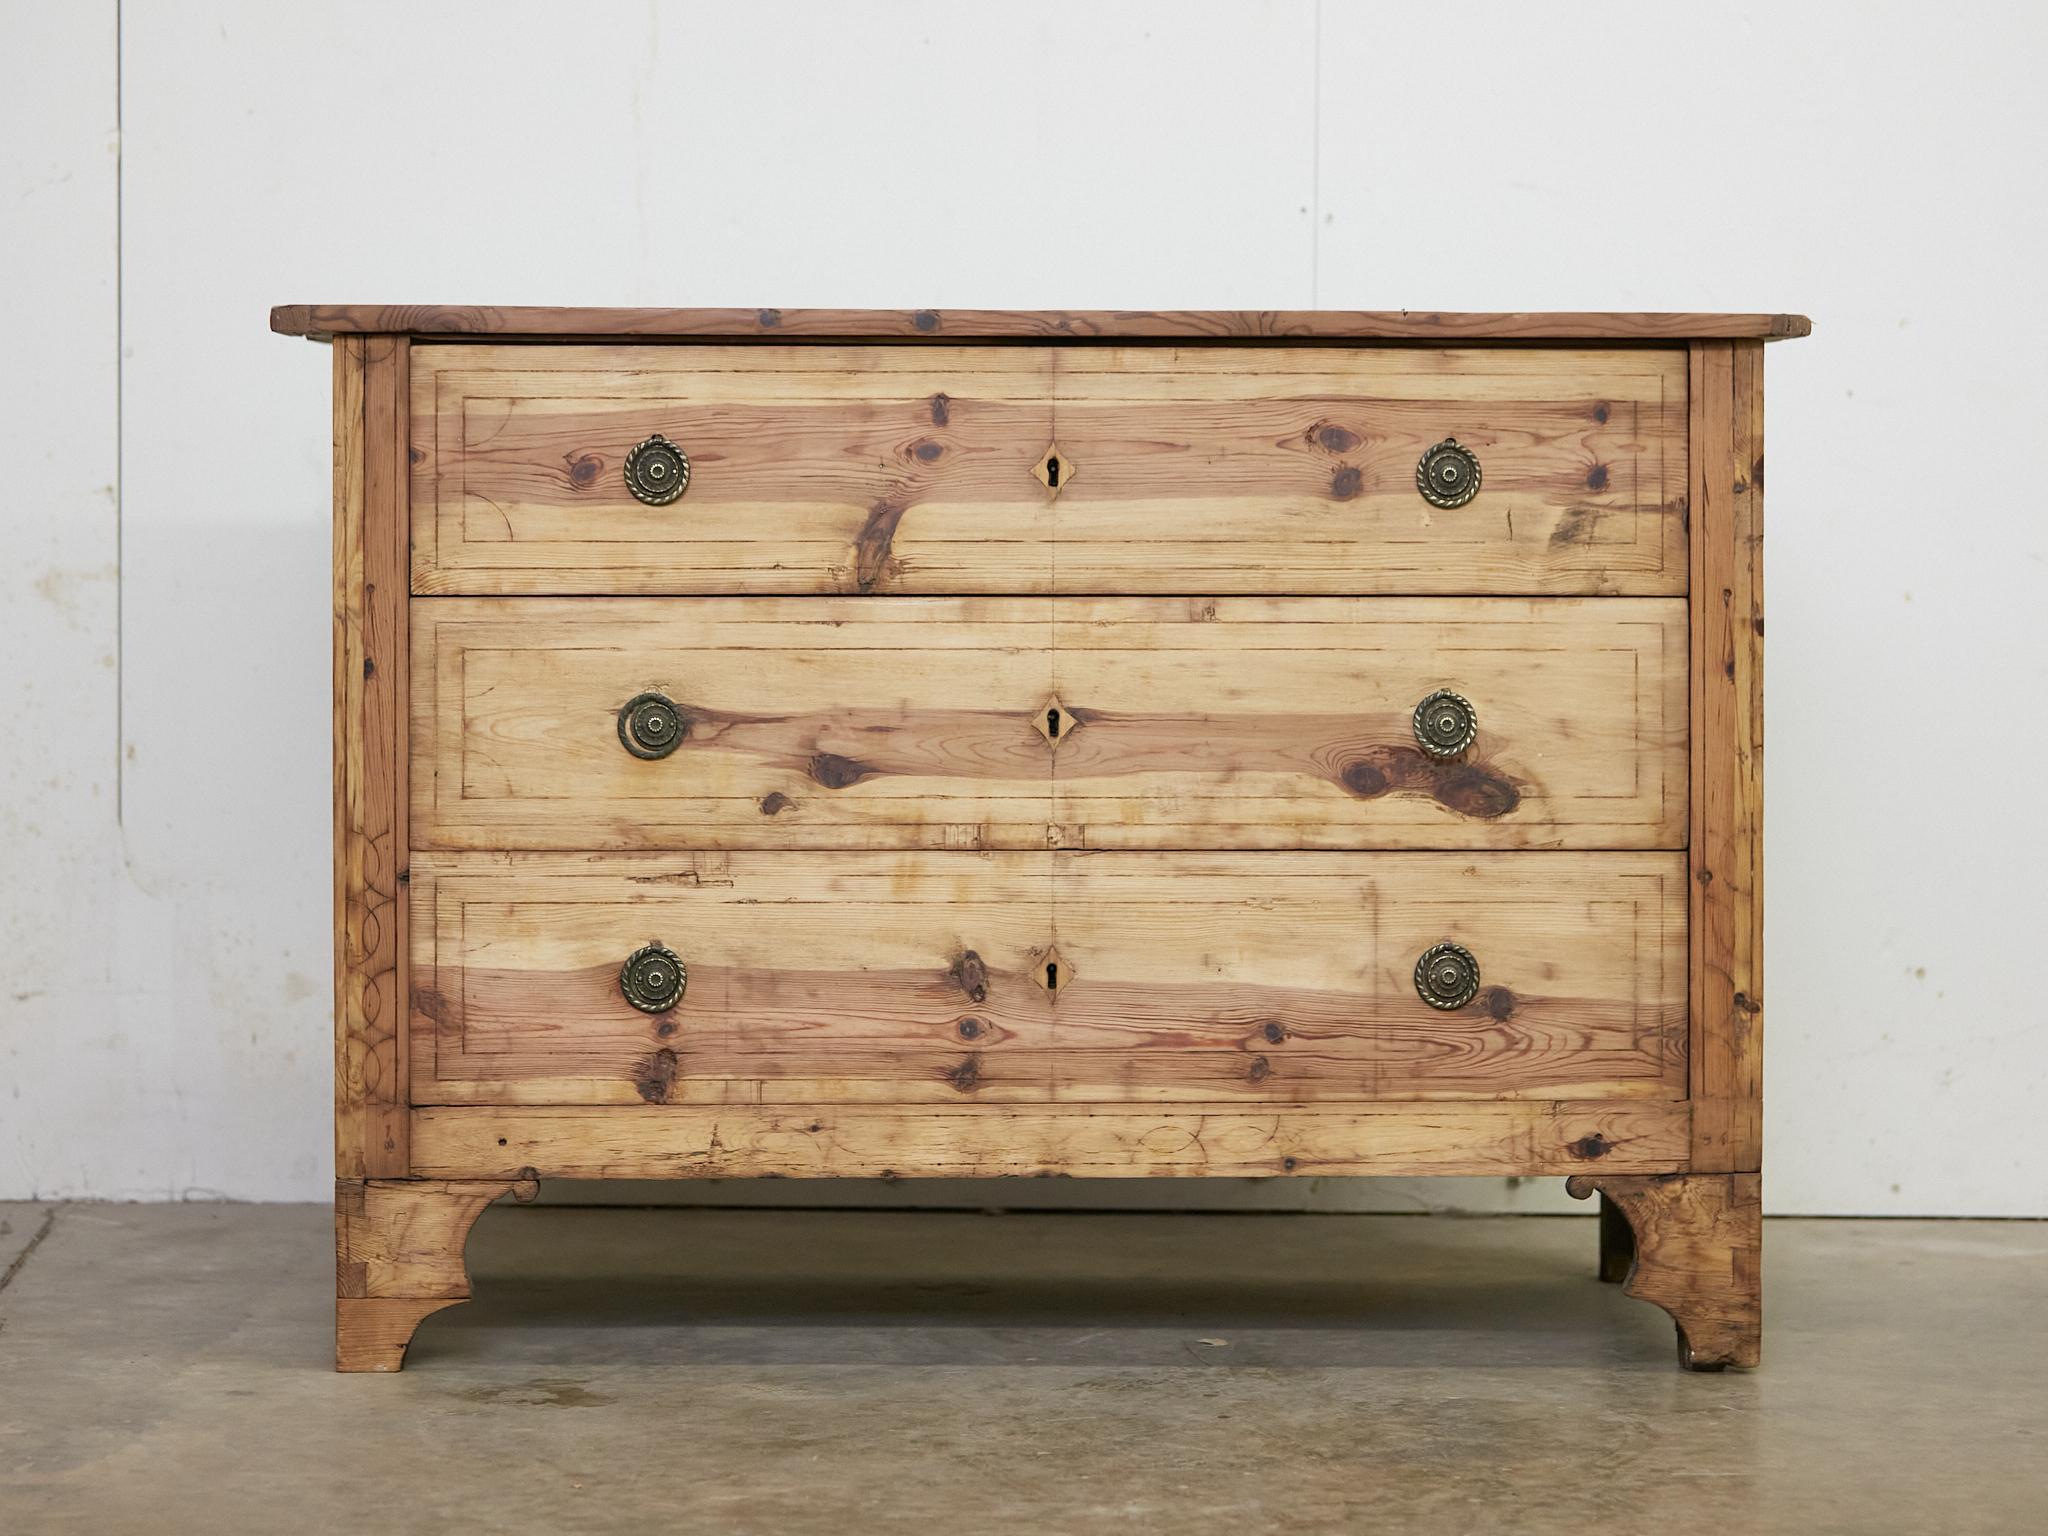 A French pine commode from the 19th century with three drawers, incised motifs, carved feet and nicely weathered appearance. This 19th-century French pine commode exudes an enchanting rustic flair, blending timeless craftsmanship with warm, lived-in